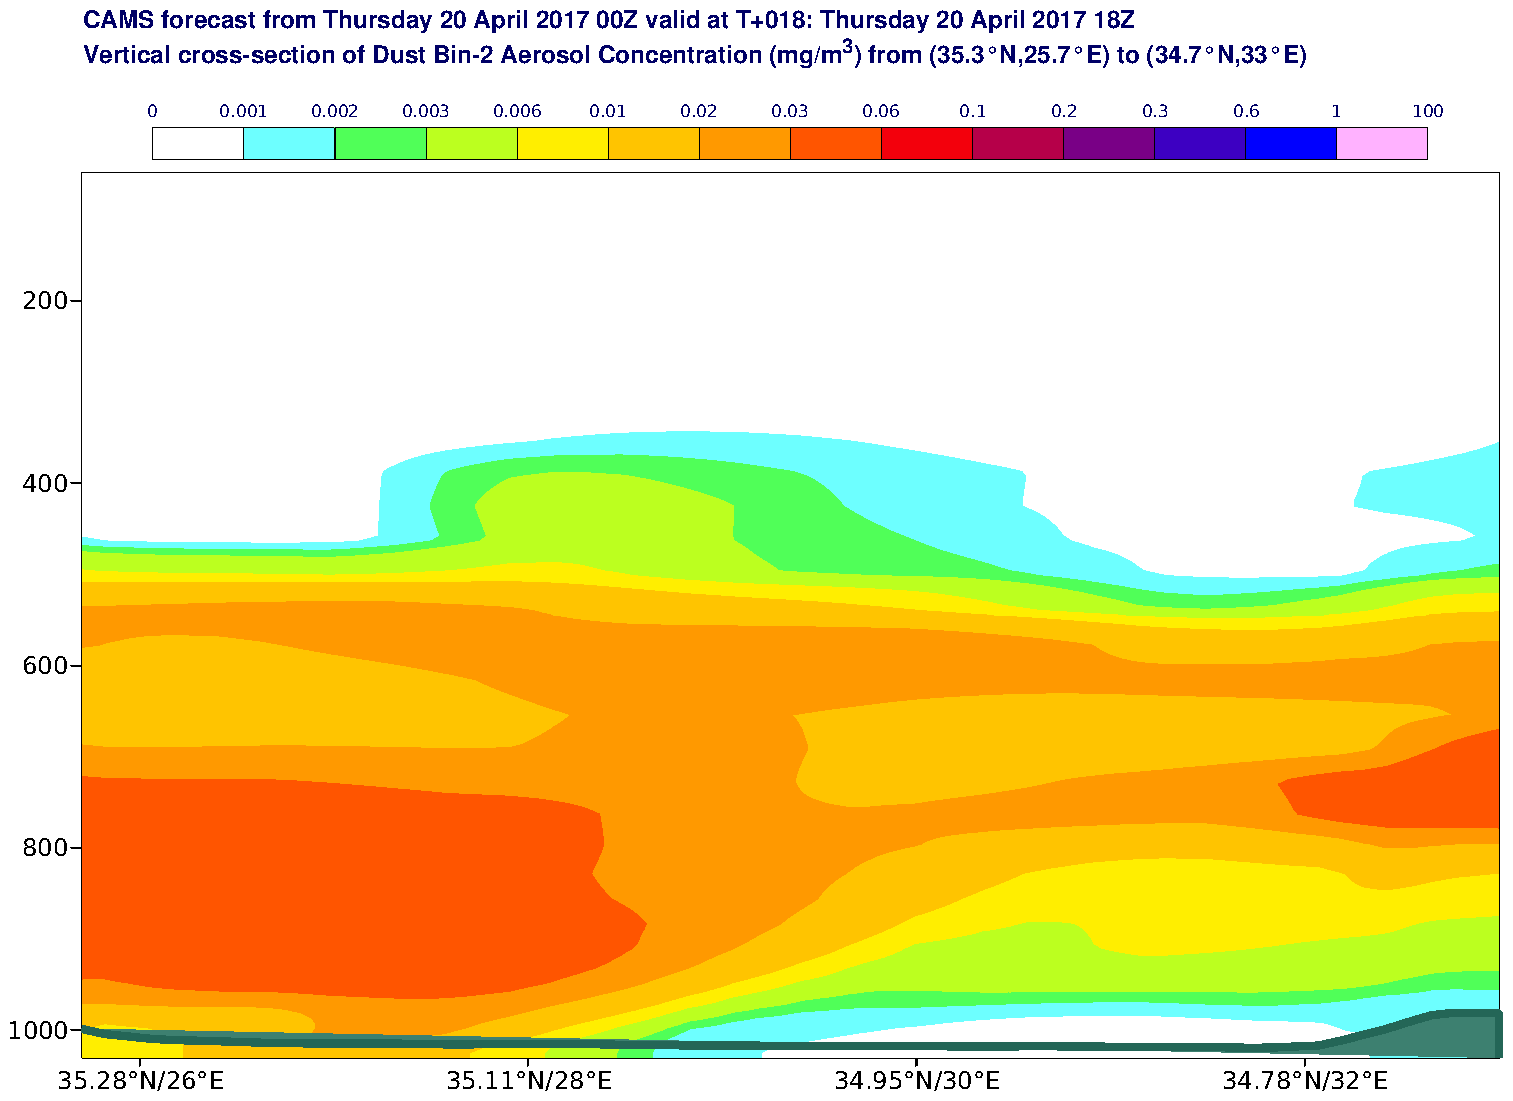 Vertical cross-section of Dust Bin-2 Aerosol Concentration (mg/m3) valid at T18 - 2017-04-20 18:00